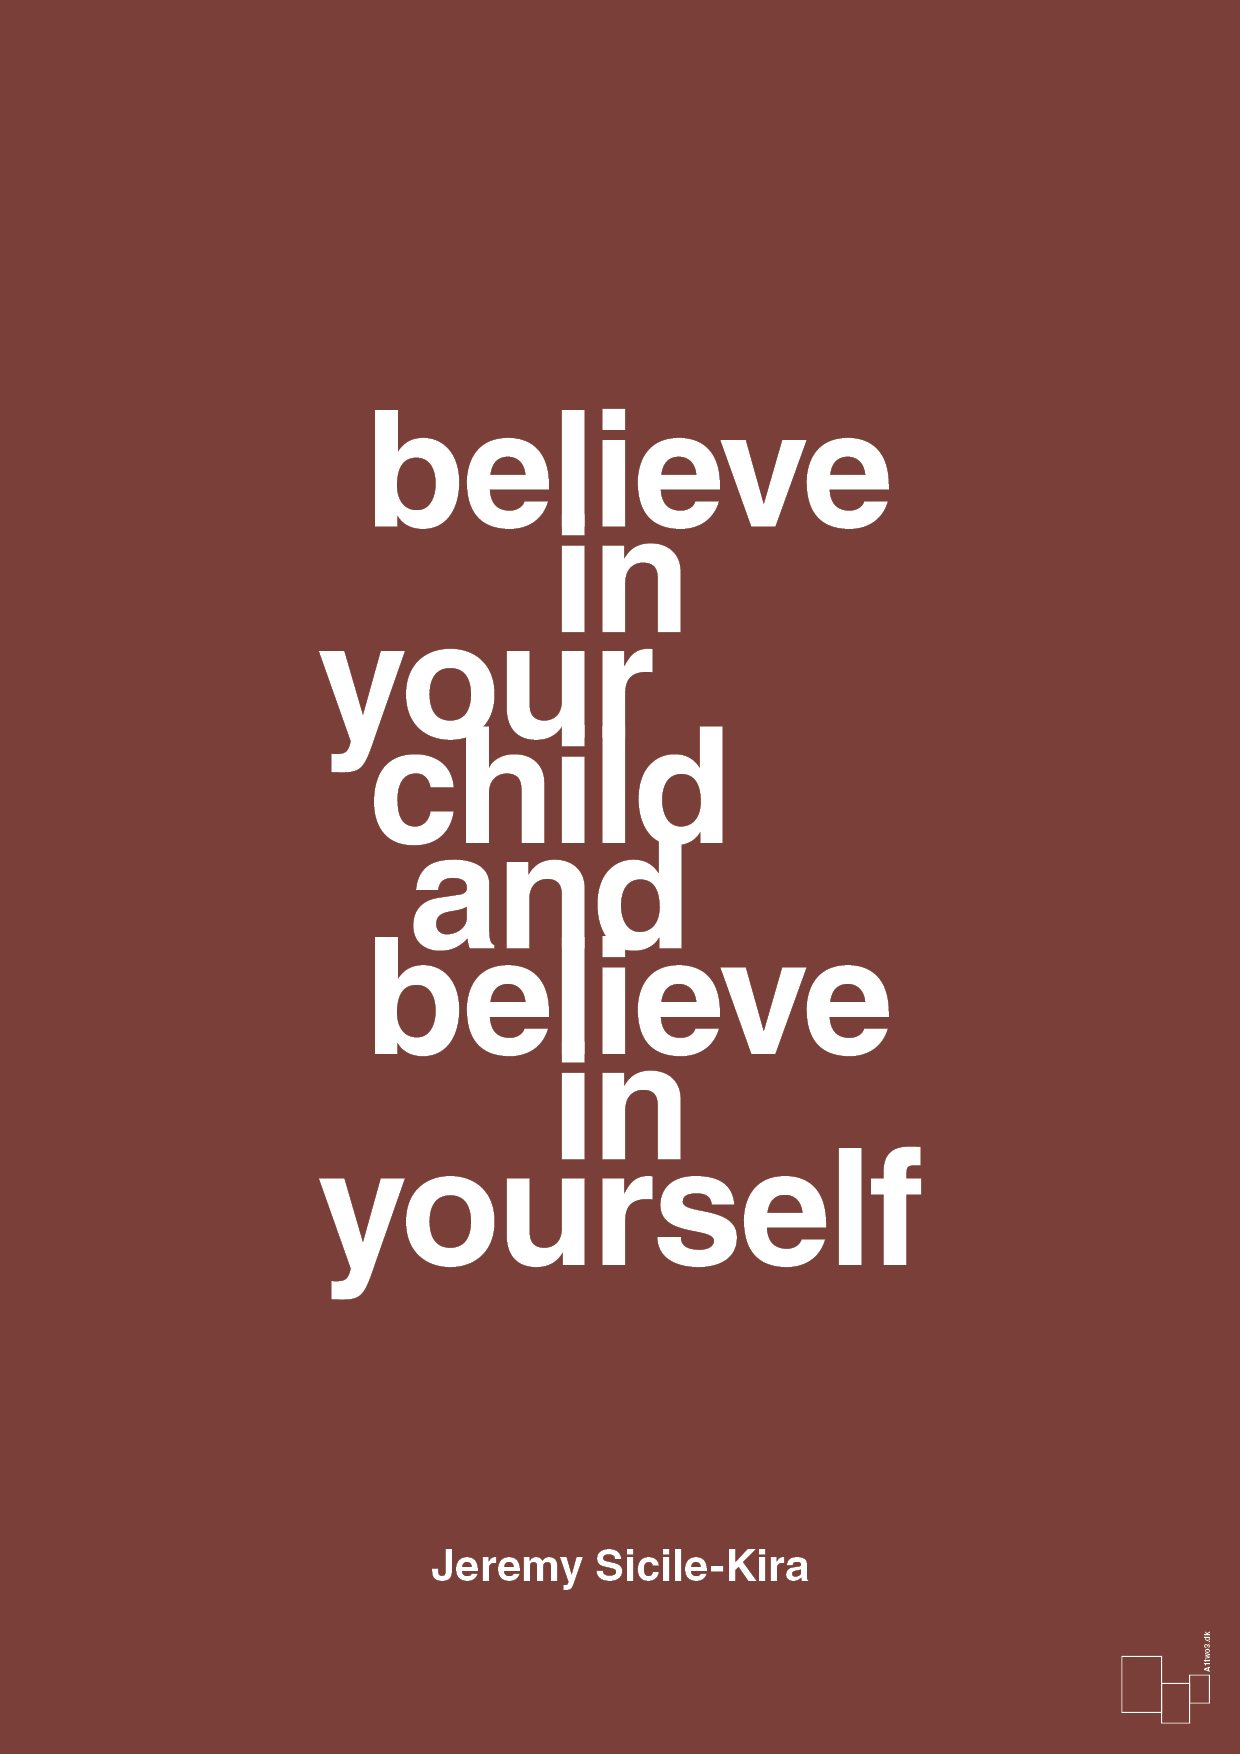 believe in your child and believe in yourself - Plakat med Samfund i Red Pepper